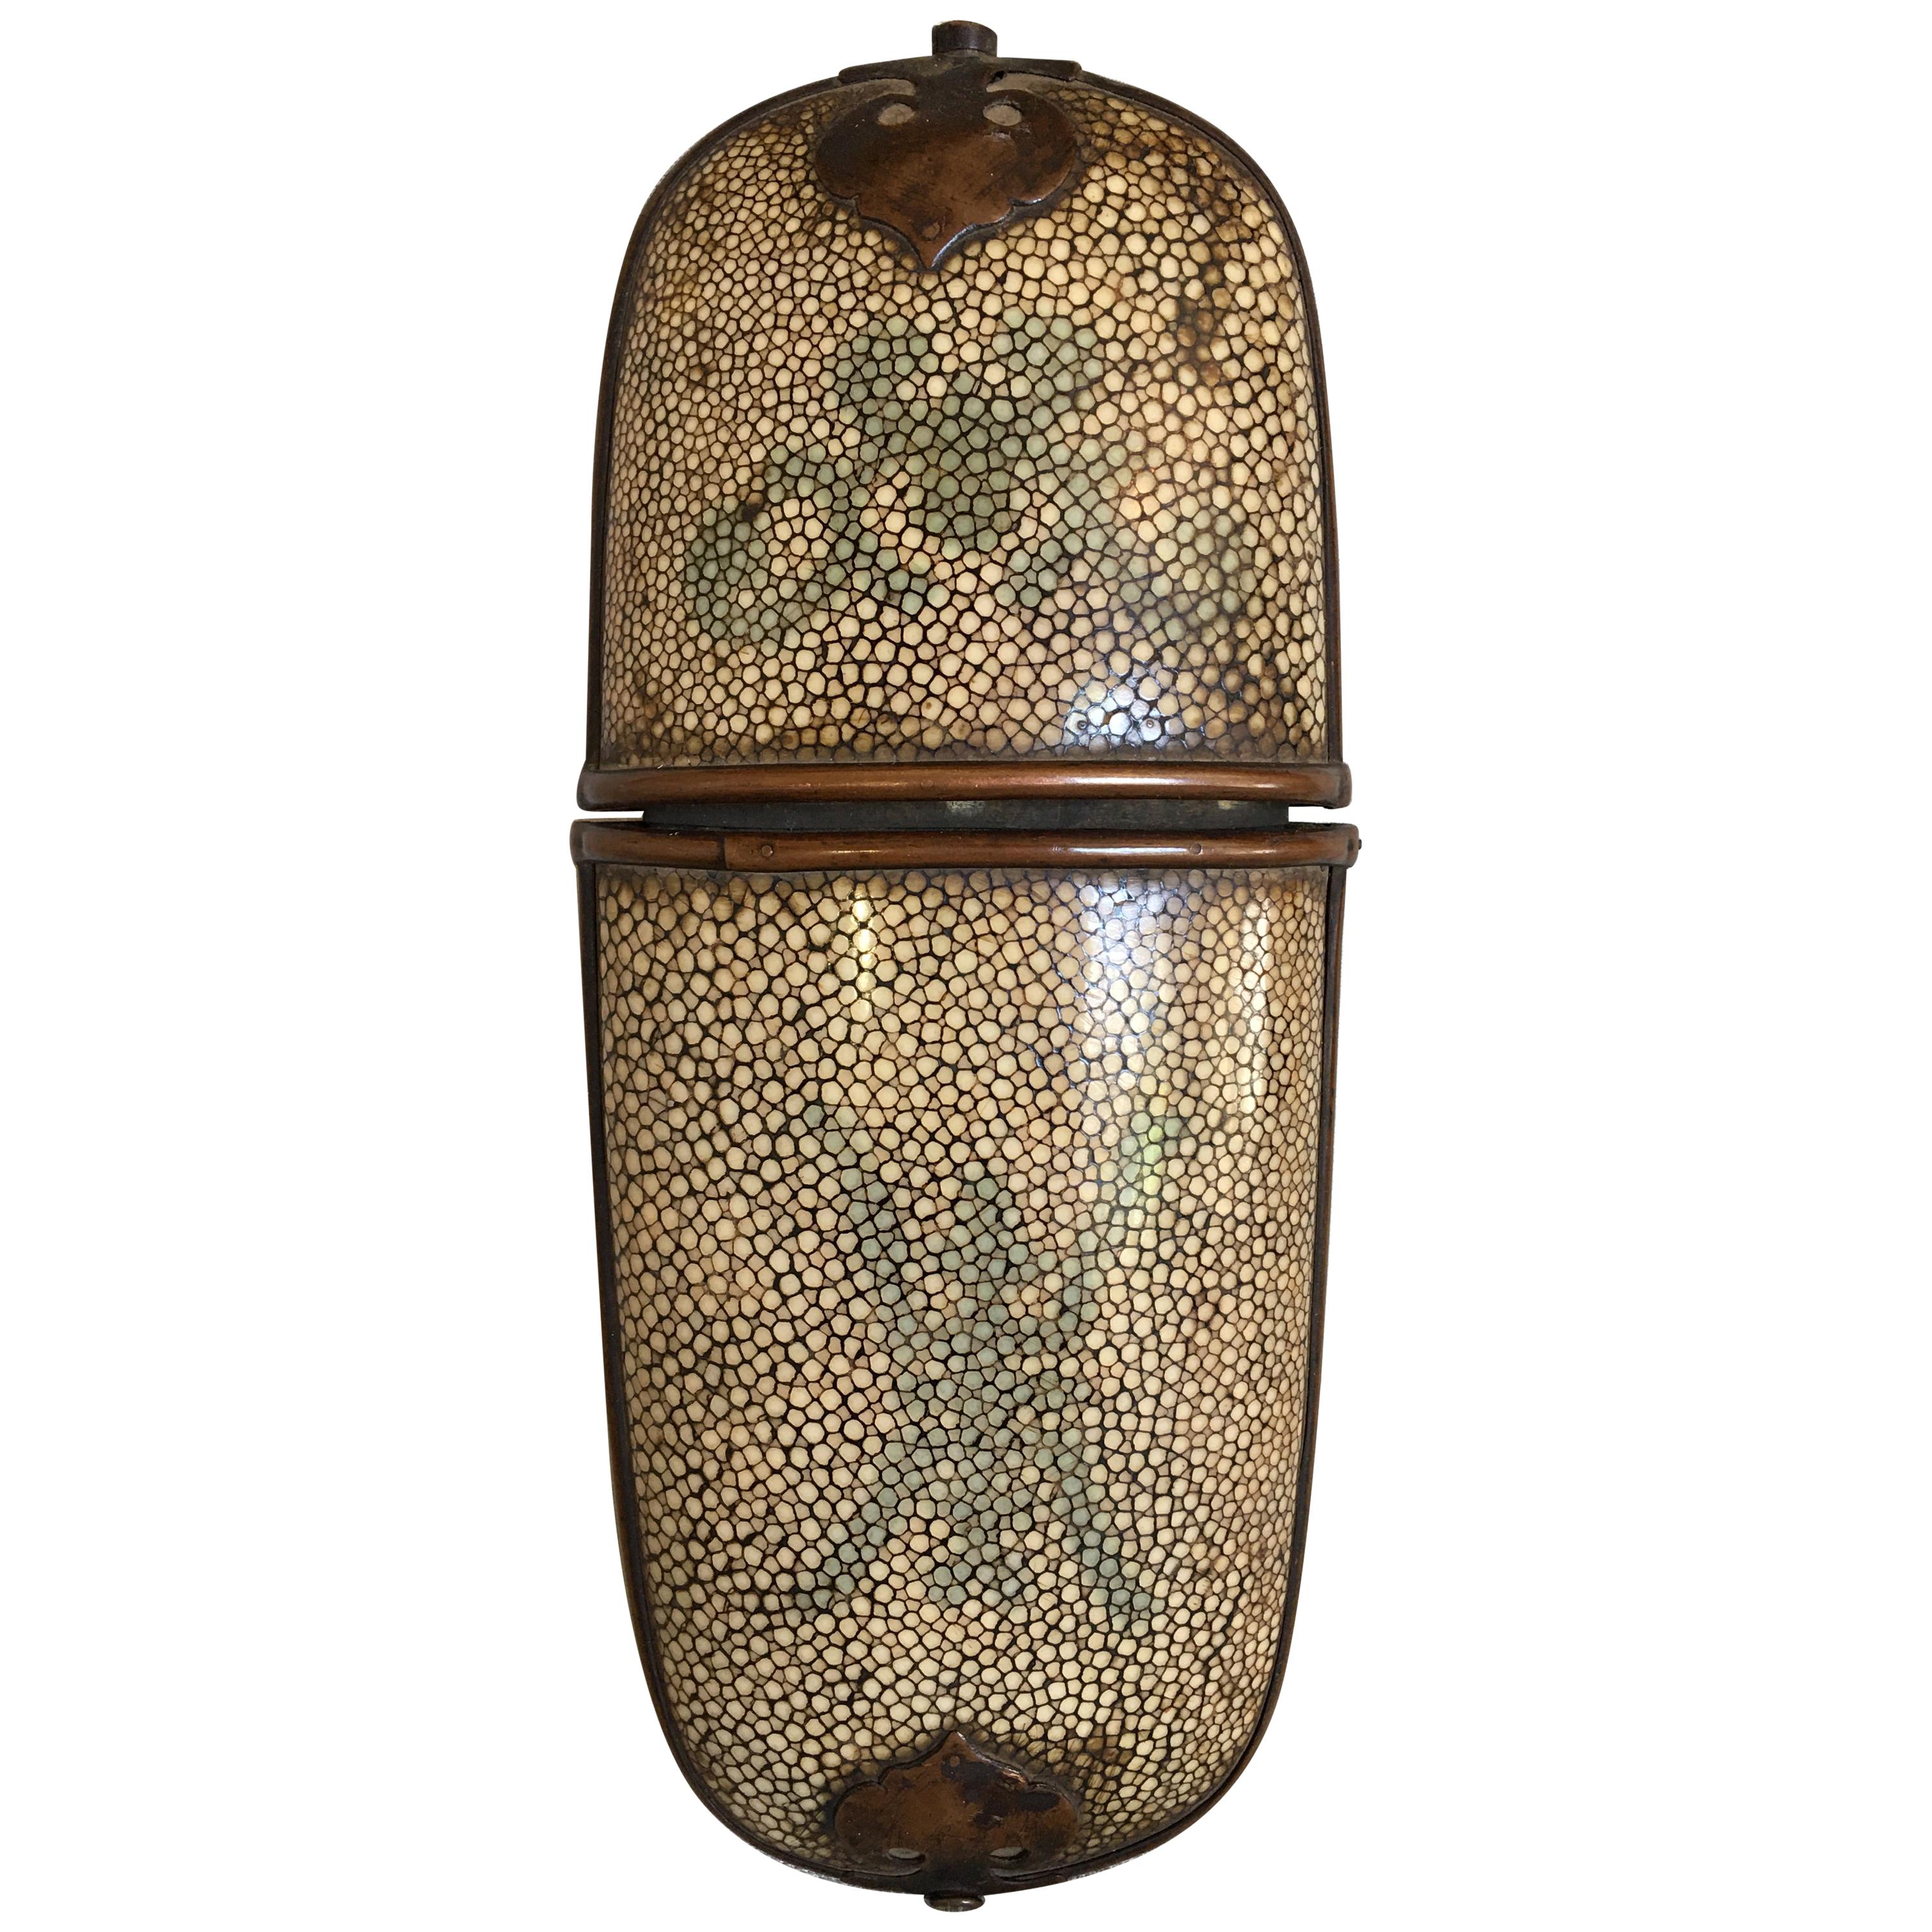 Chinese Beige Shagreen Brass Mounted Eyeglass Case, Early 20th Century